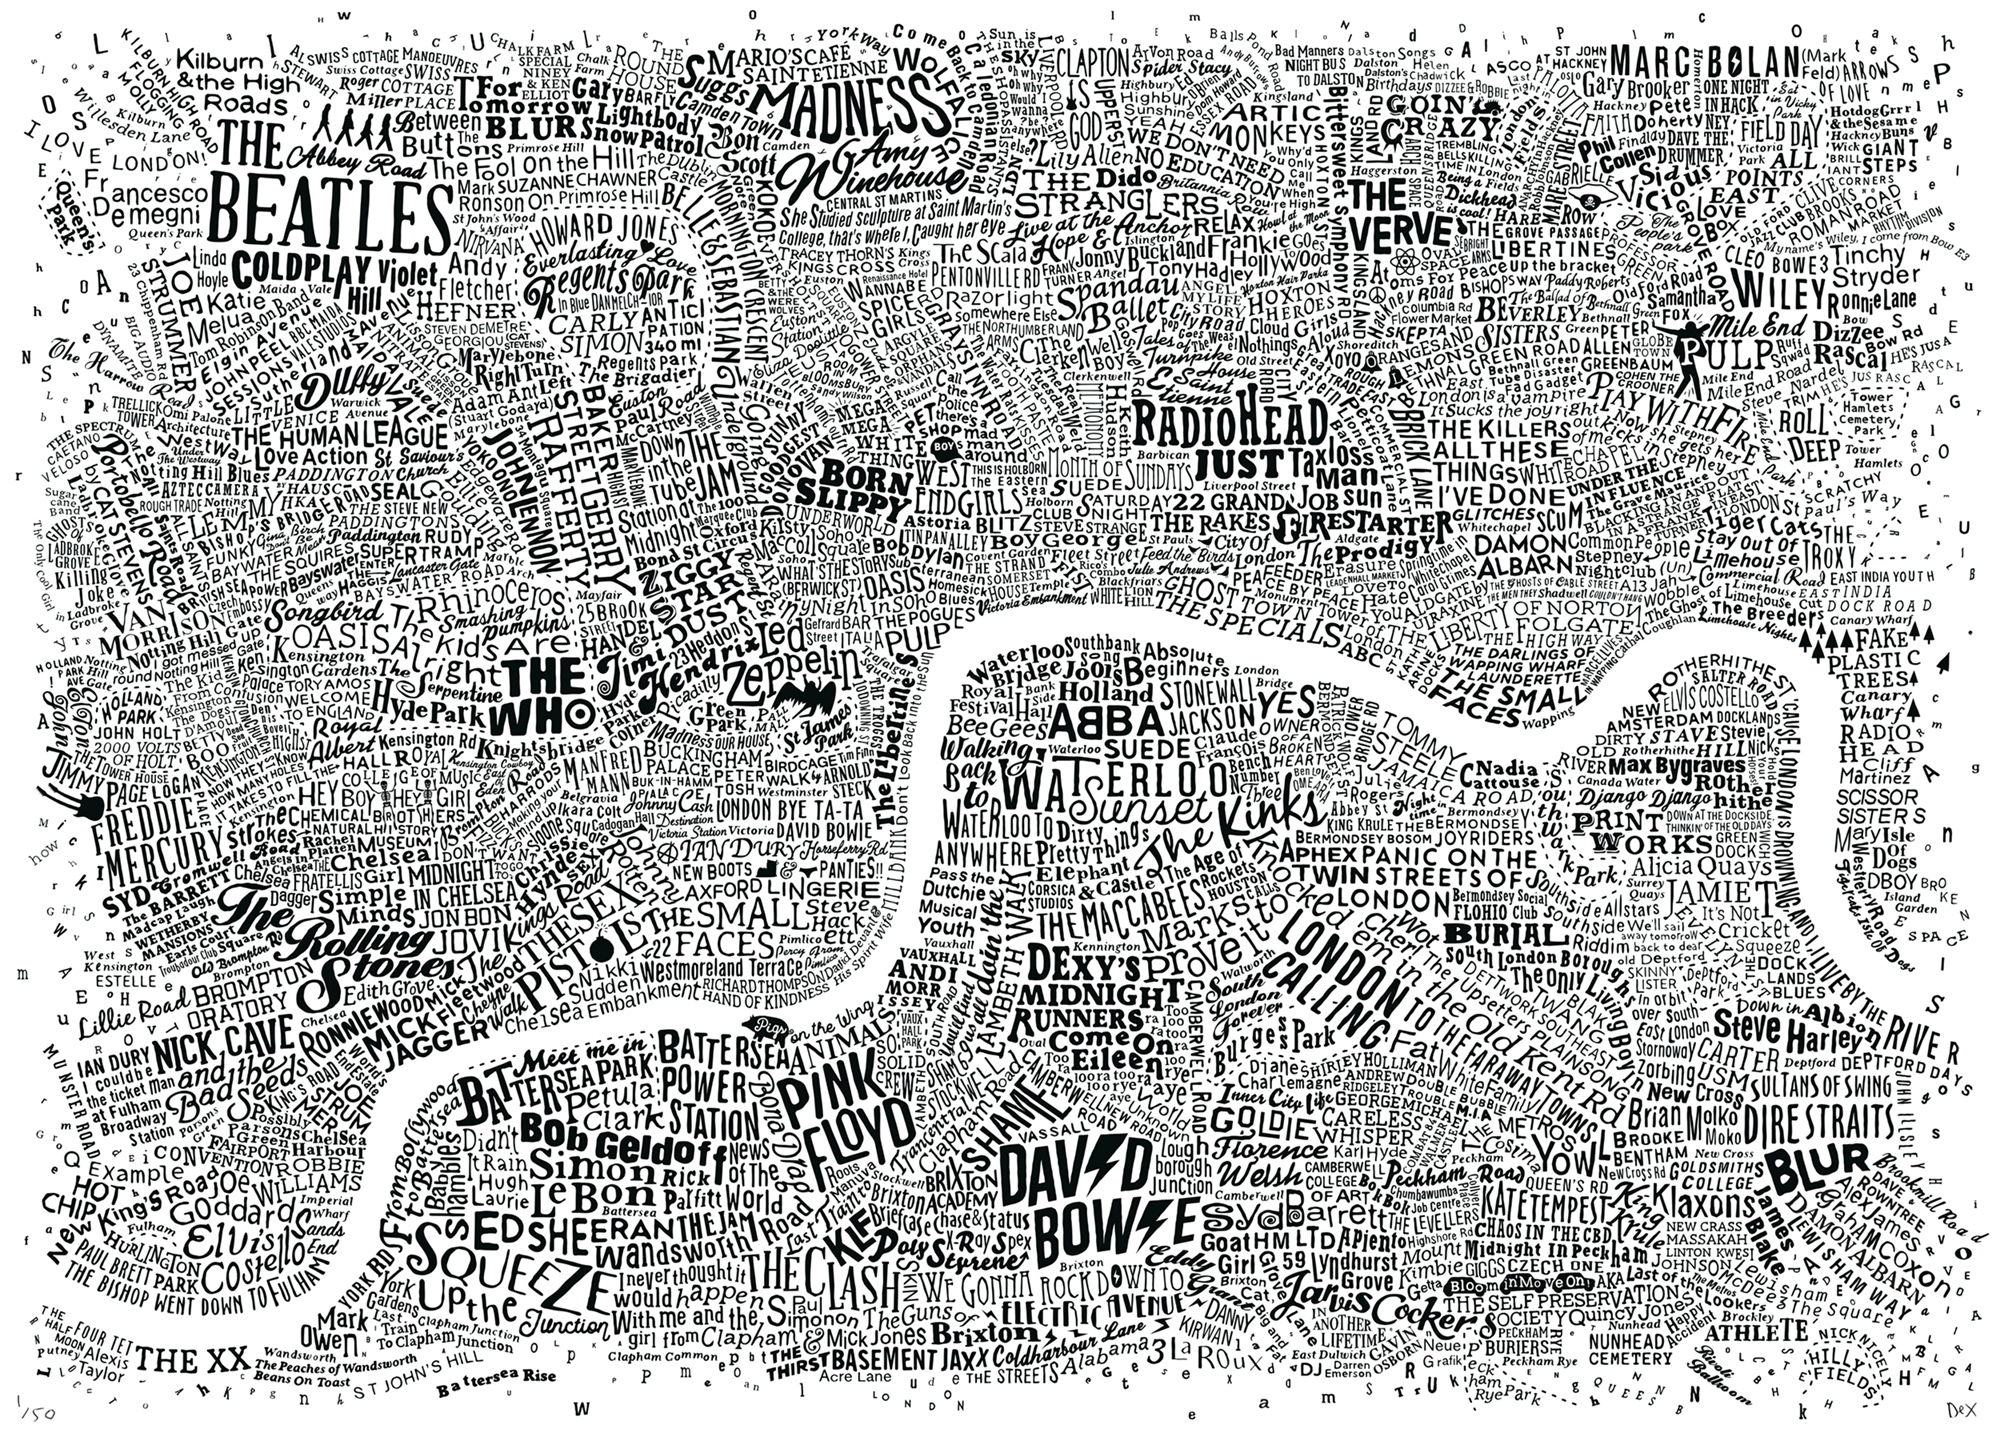 The London Music Map